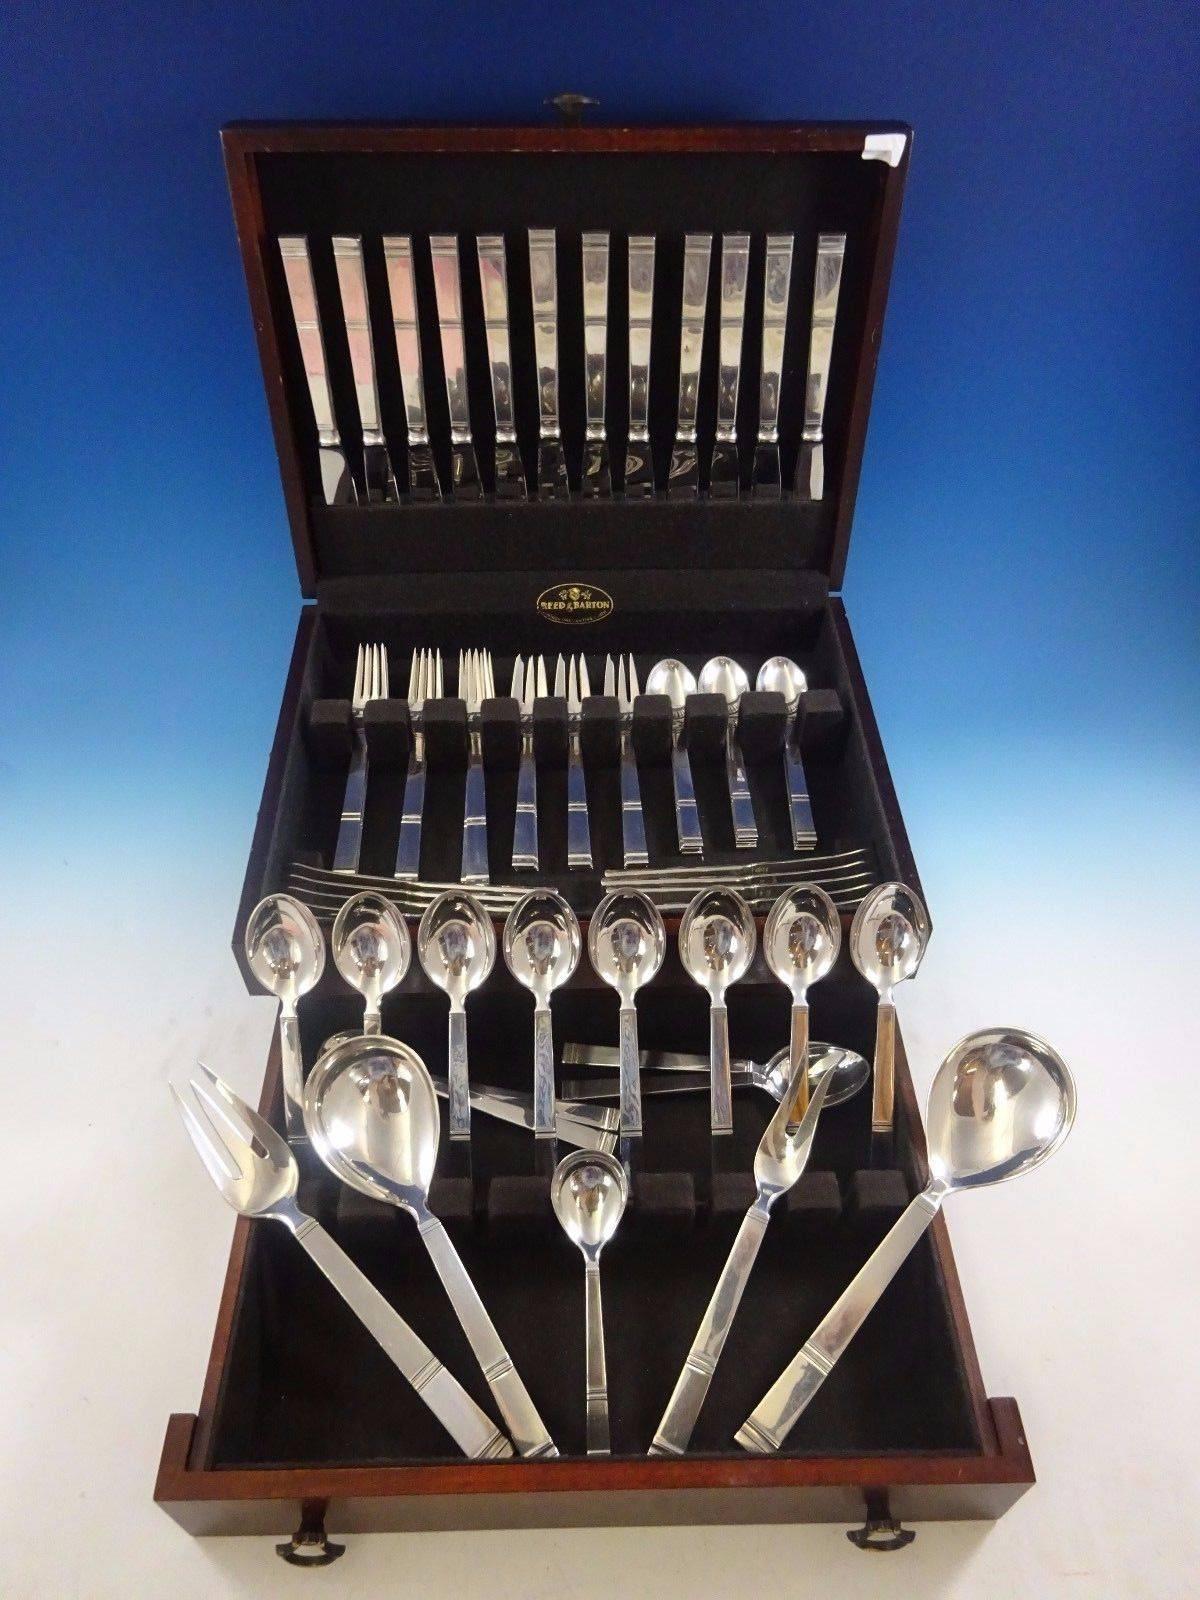 Large Cardinal by Grann and Laglye (Denmark) sterling silver dinner Size flatware set, marked H. Nils - 77 pieces. This set includes:

 

12 dinner size knives, 9 1/8